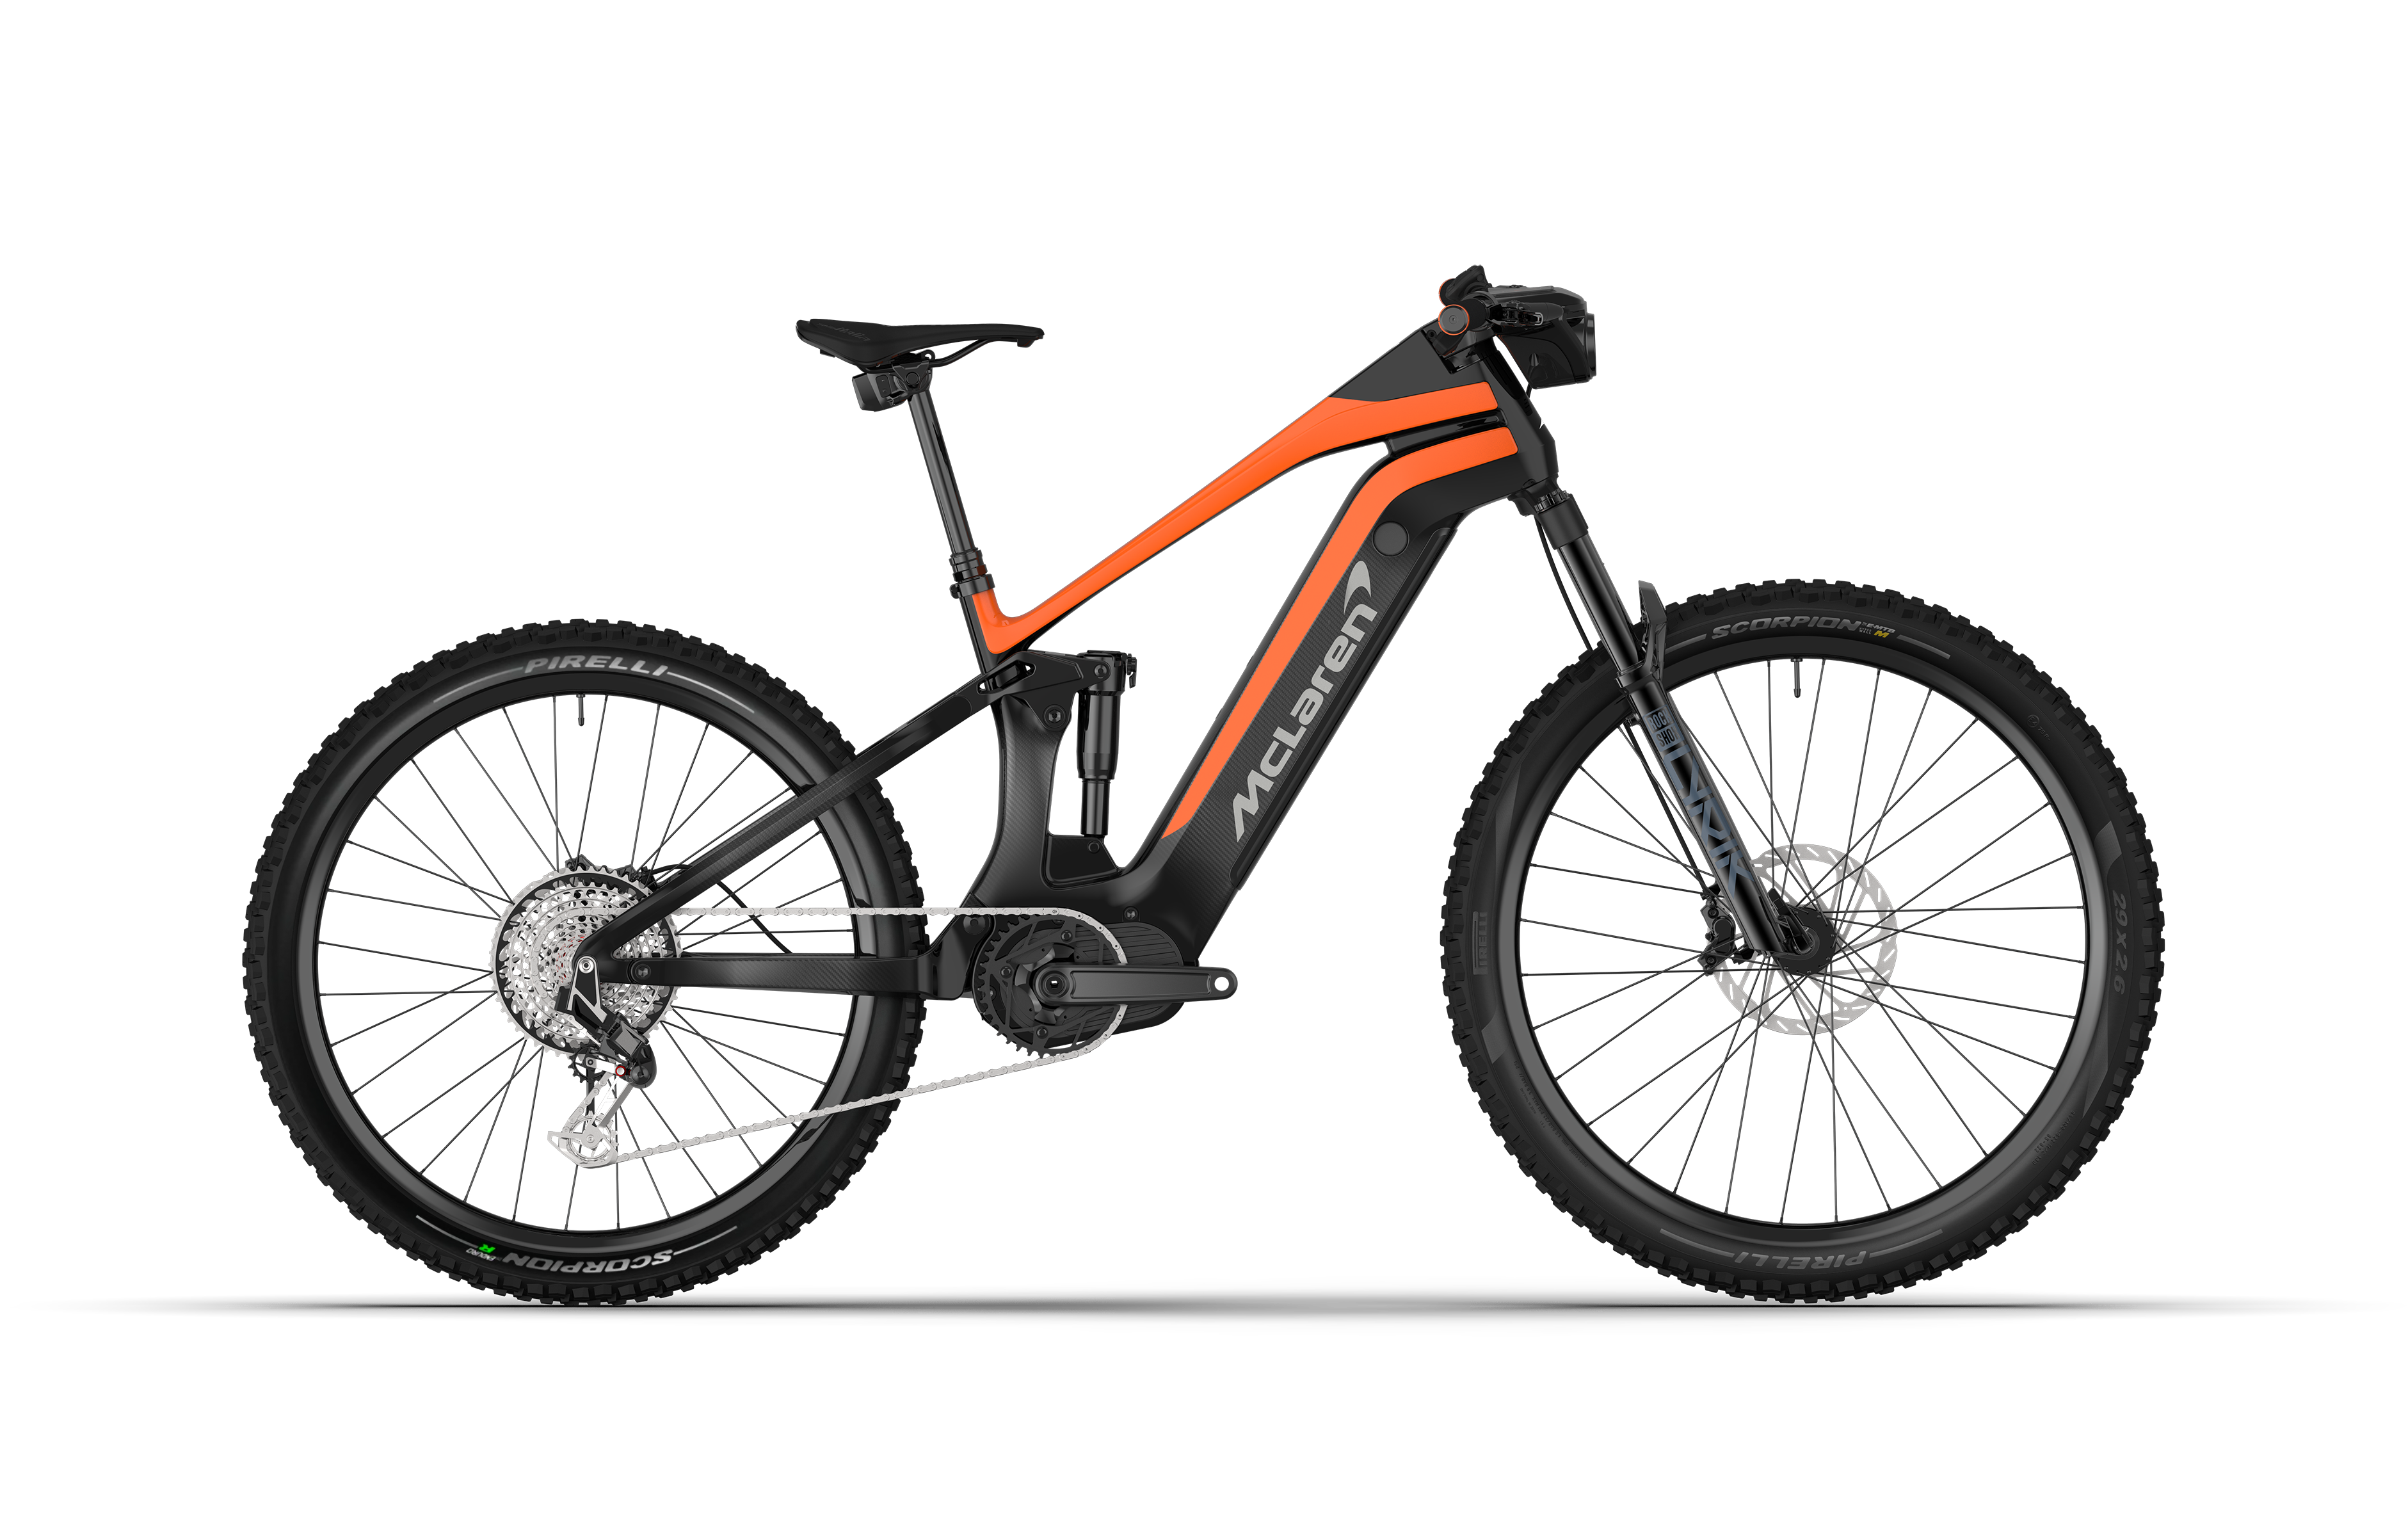 160mm front and 145mm rear travel McLaren Extreme e-mountain bike with SRAM Eagle drivetrain, Rock Shox Lyrik fork, and full carbon frame.